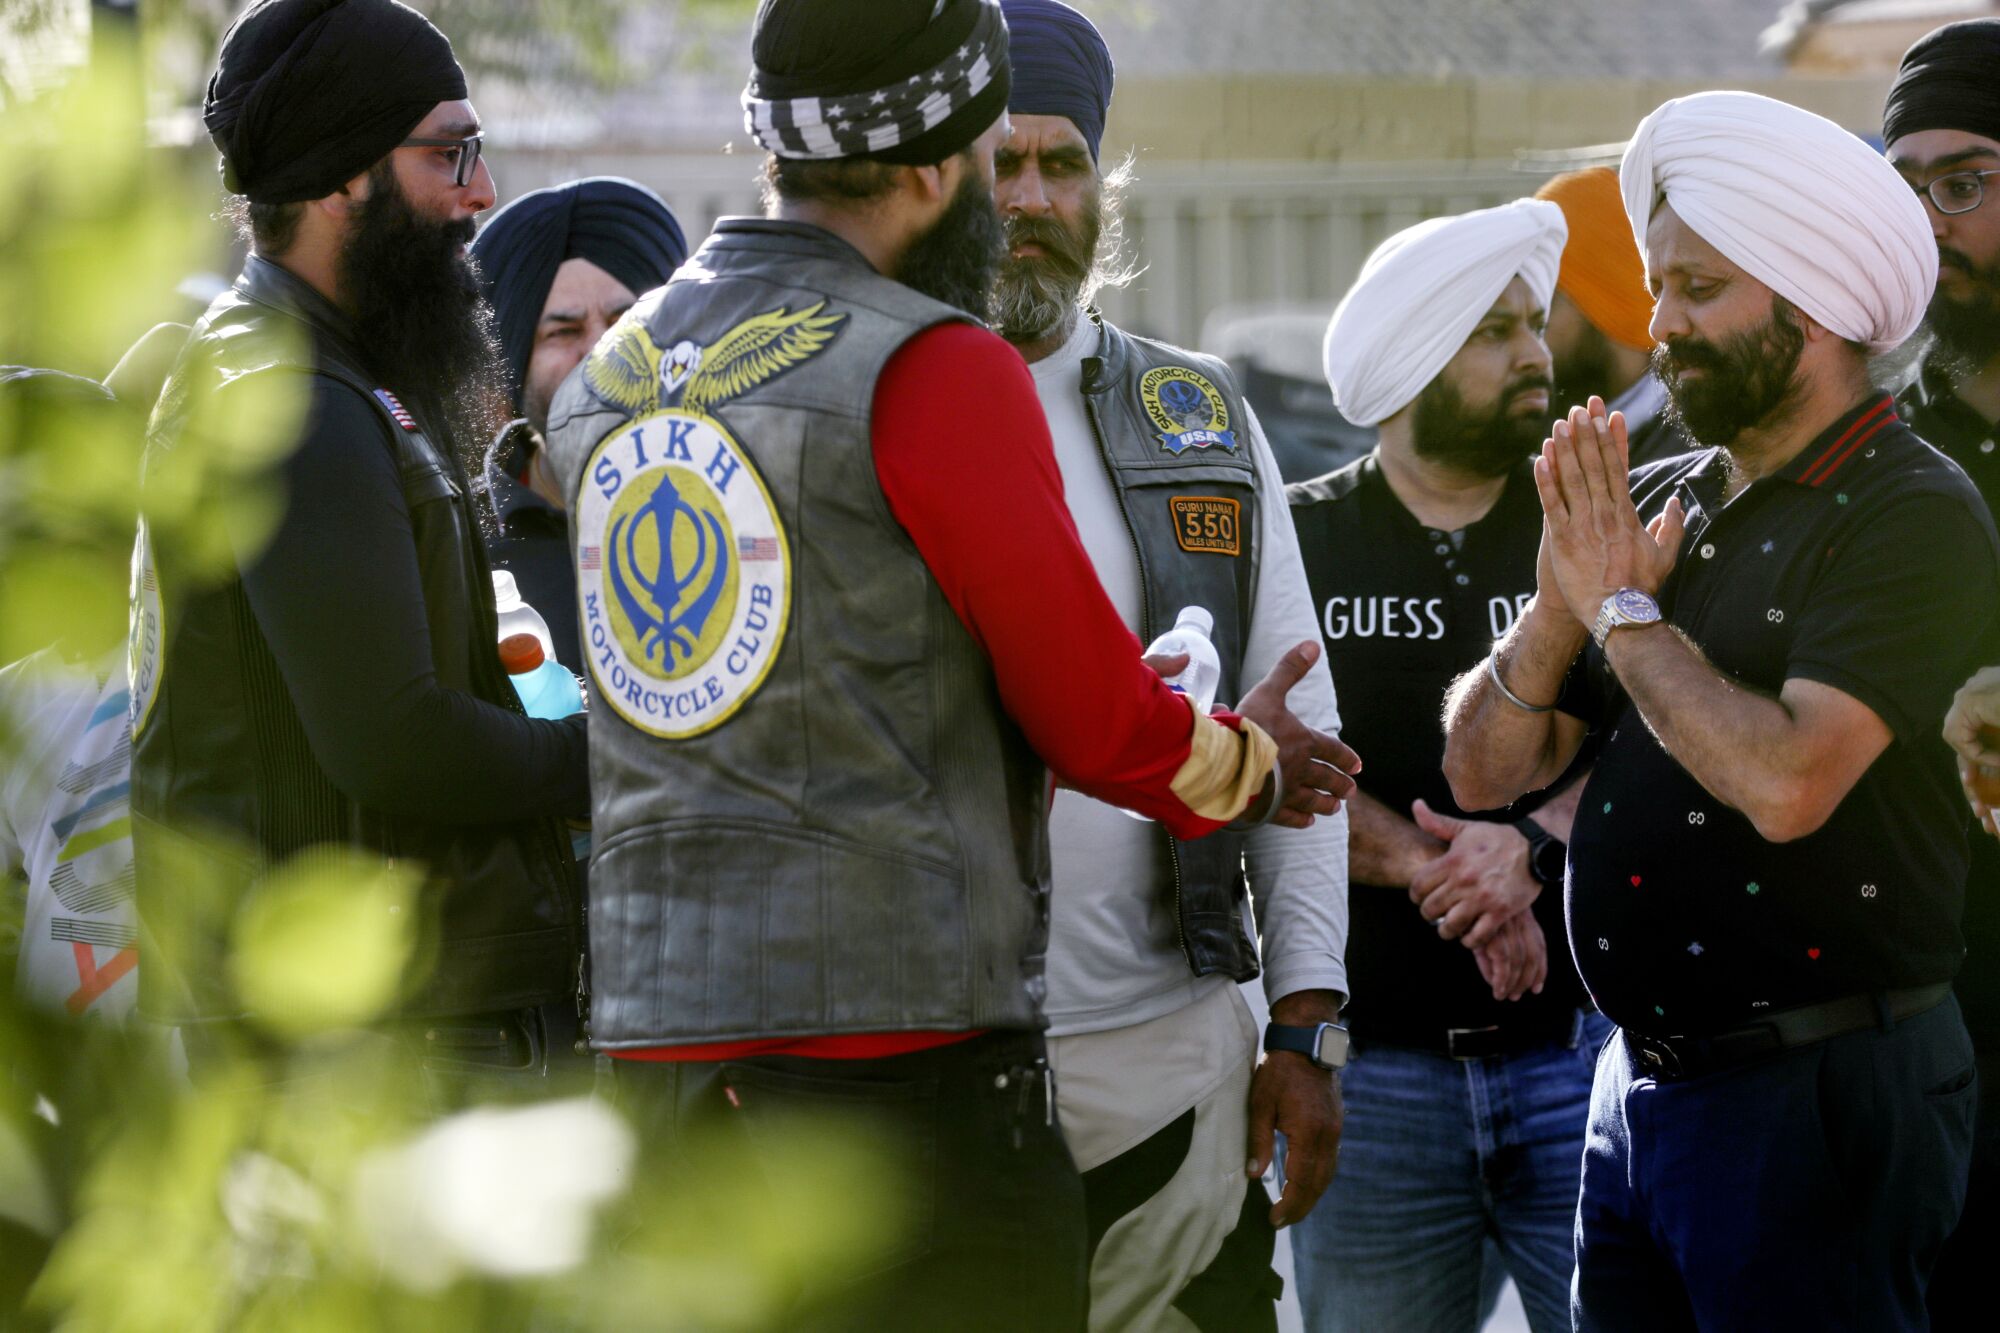 Members of Sikh Motorcycle Club USA pay their respect and condolences to Rana Singh Sodhi